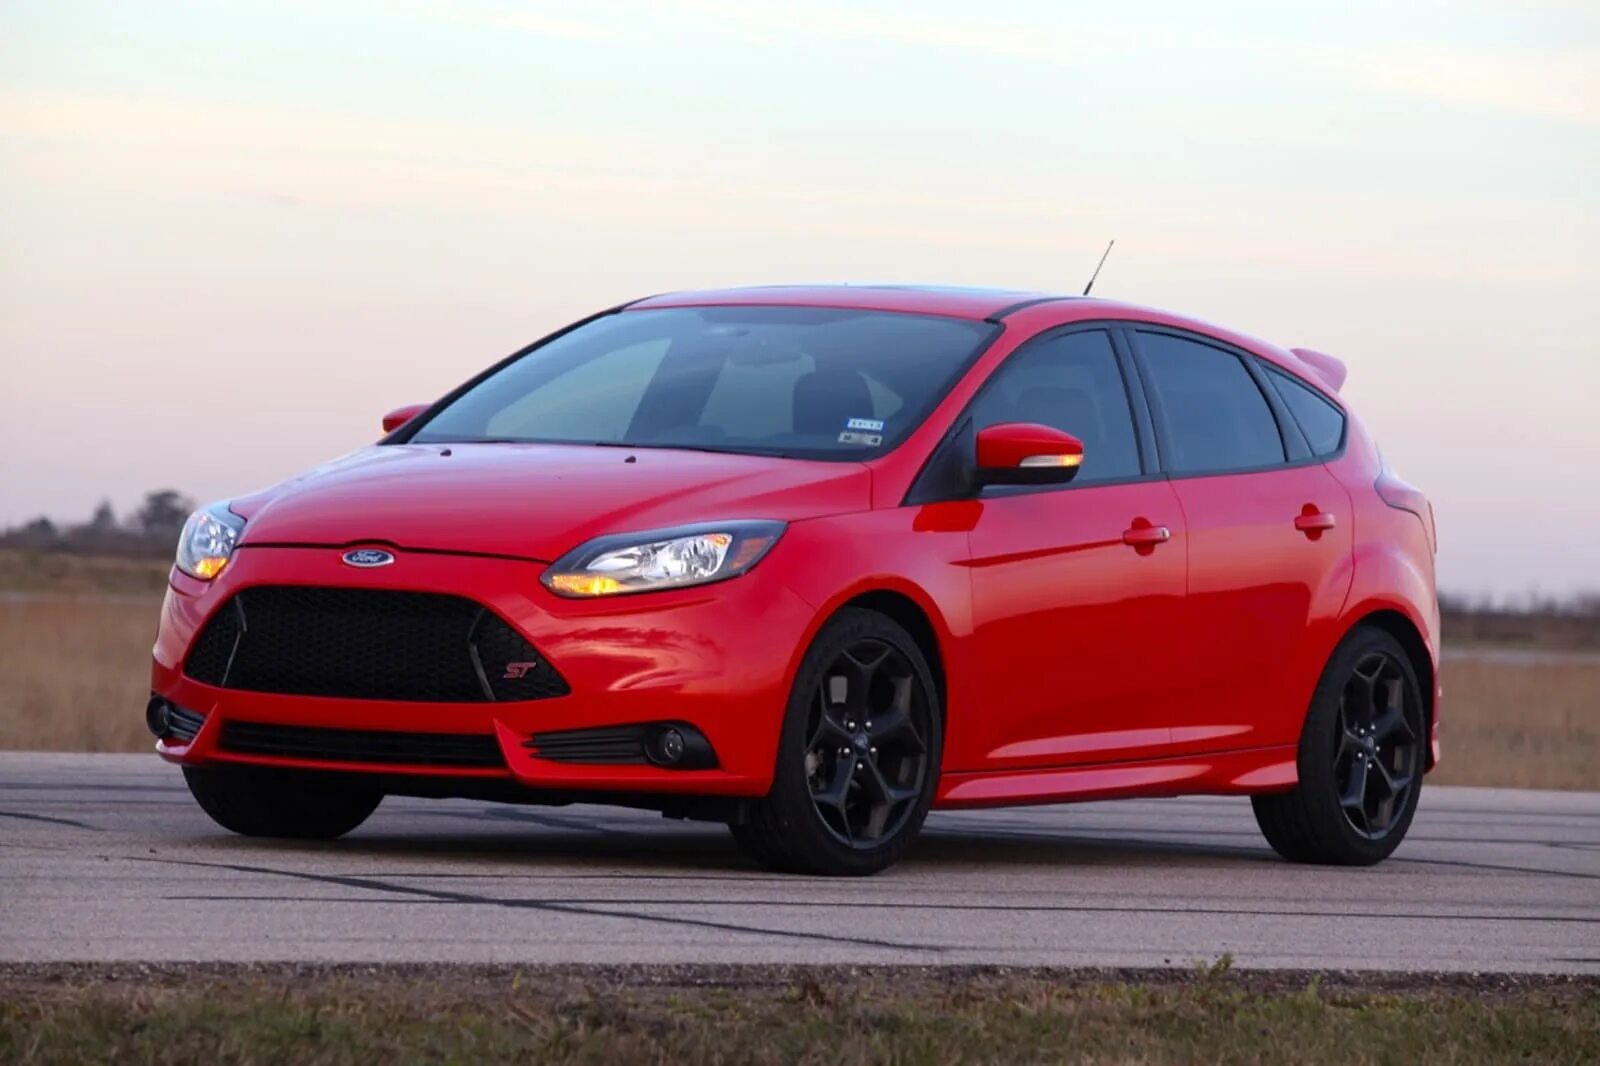 Ford Focus St 2013. Ford Focus 3 St. Форд фокус ст 2013. Ford Focus 3 St 2013.